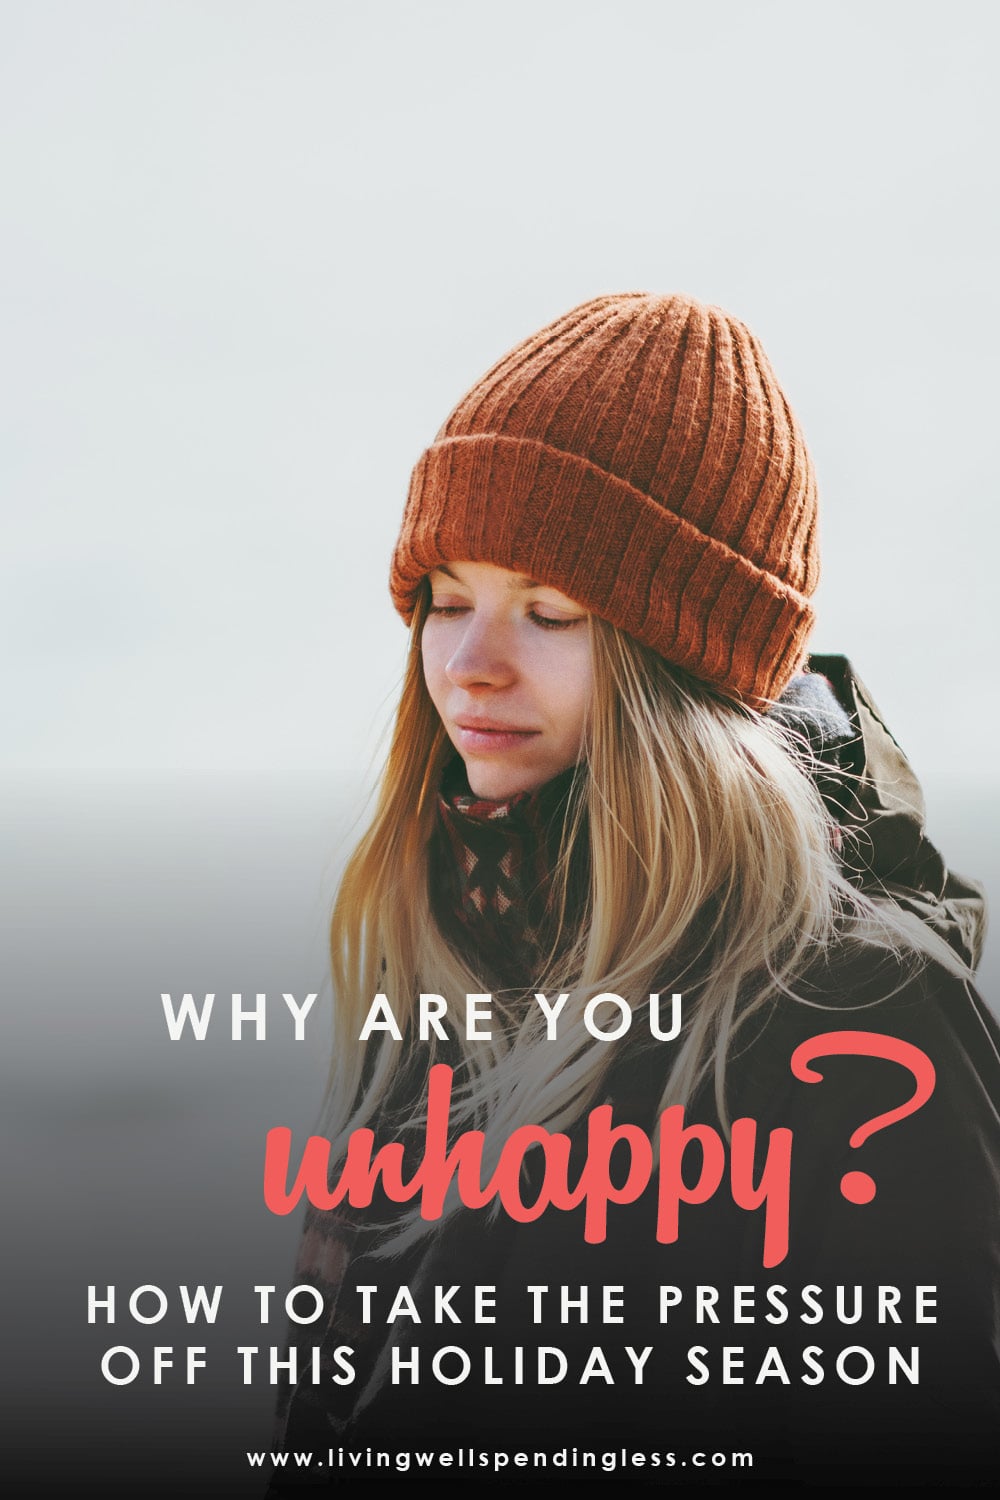 Struggling with unhappiness during the holidays? Don’t miss these 4 questions to ask yourself to help take the pressure off this holiday season! #holidays #depression #happiness #holidaymindset #anxiety #mindset #positivity #holidaystress #chaseawaytheblues